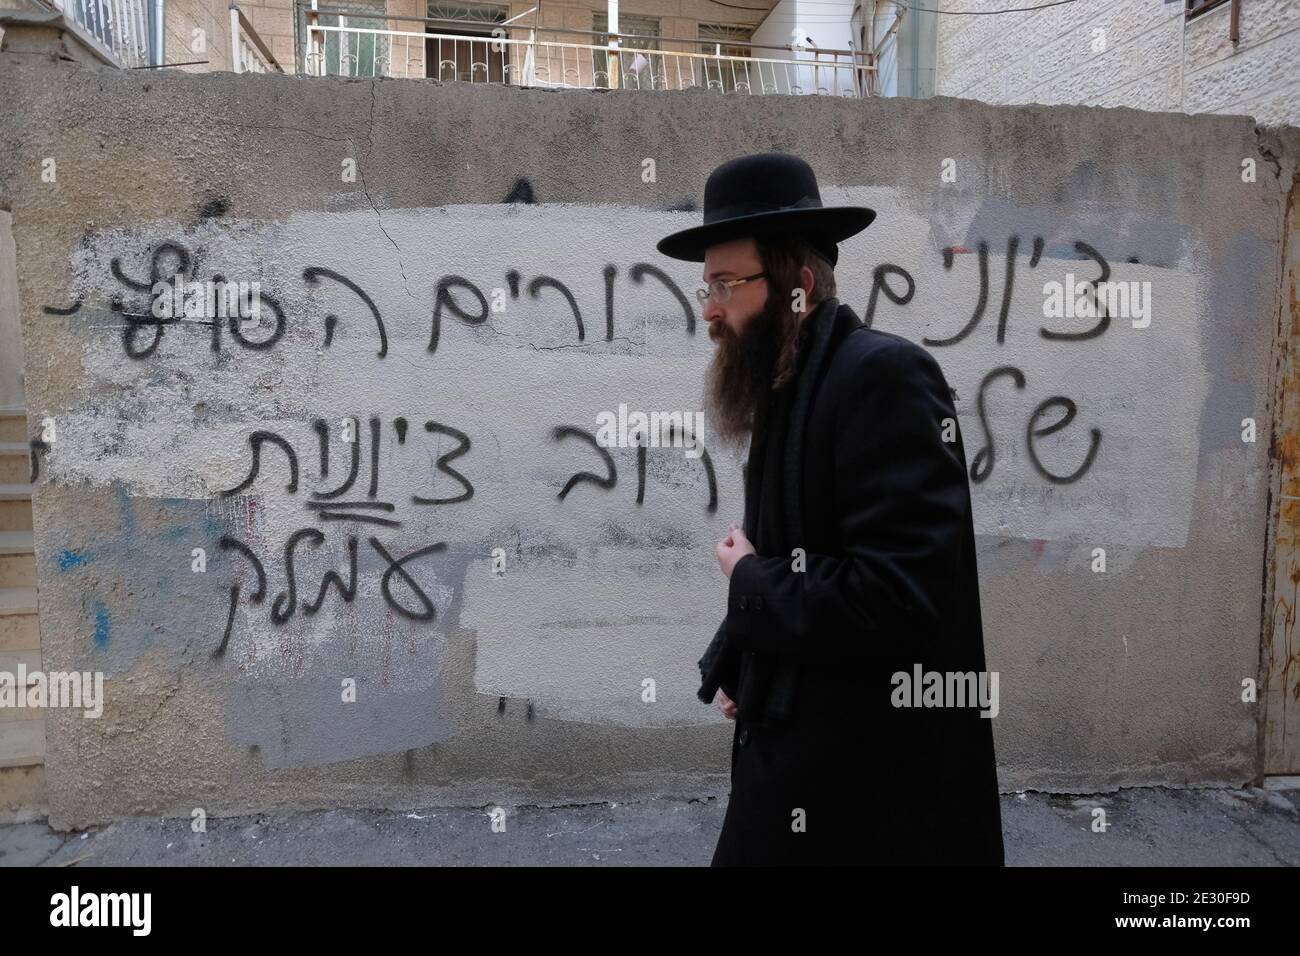 An ultra orthodox Jew walks past a wall with anti Zionism hate graffiti sprayed by extreme anti-Zionist Haredi Jews in Mea Shearim ultra orthodox neighborhood in West Jerusalem Israel. Neturei Karta opposes Zionism and calls for a 'peaceful dismantling' of the State of Israel, in the belief that Jews are forbidden to have their own state until the coming of the Jewish Messiah and that the state of Israel is a rebellion against God. Stock Photo